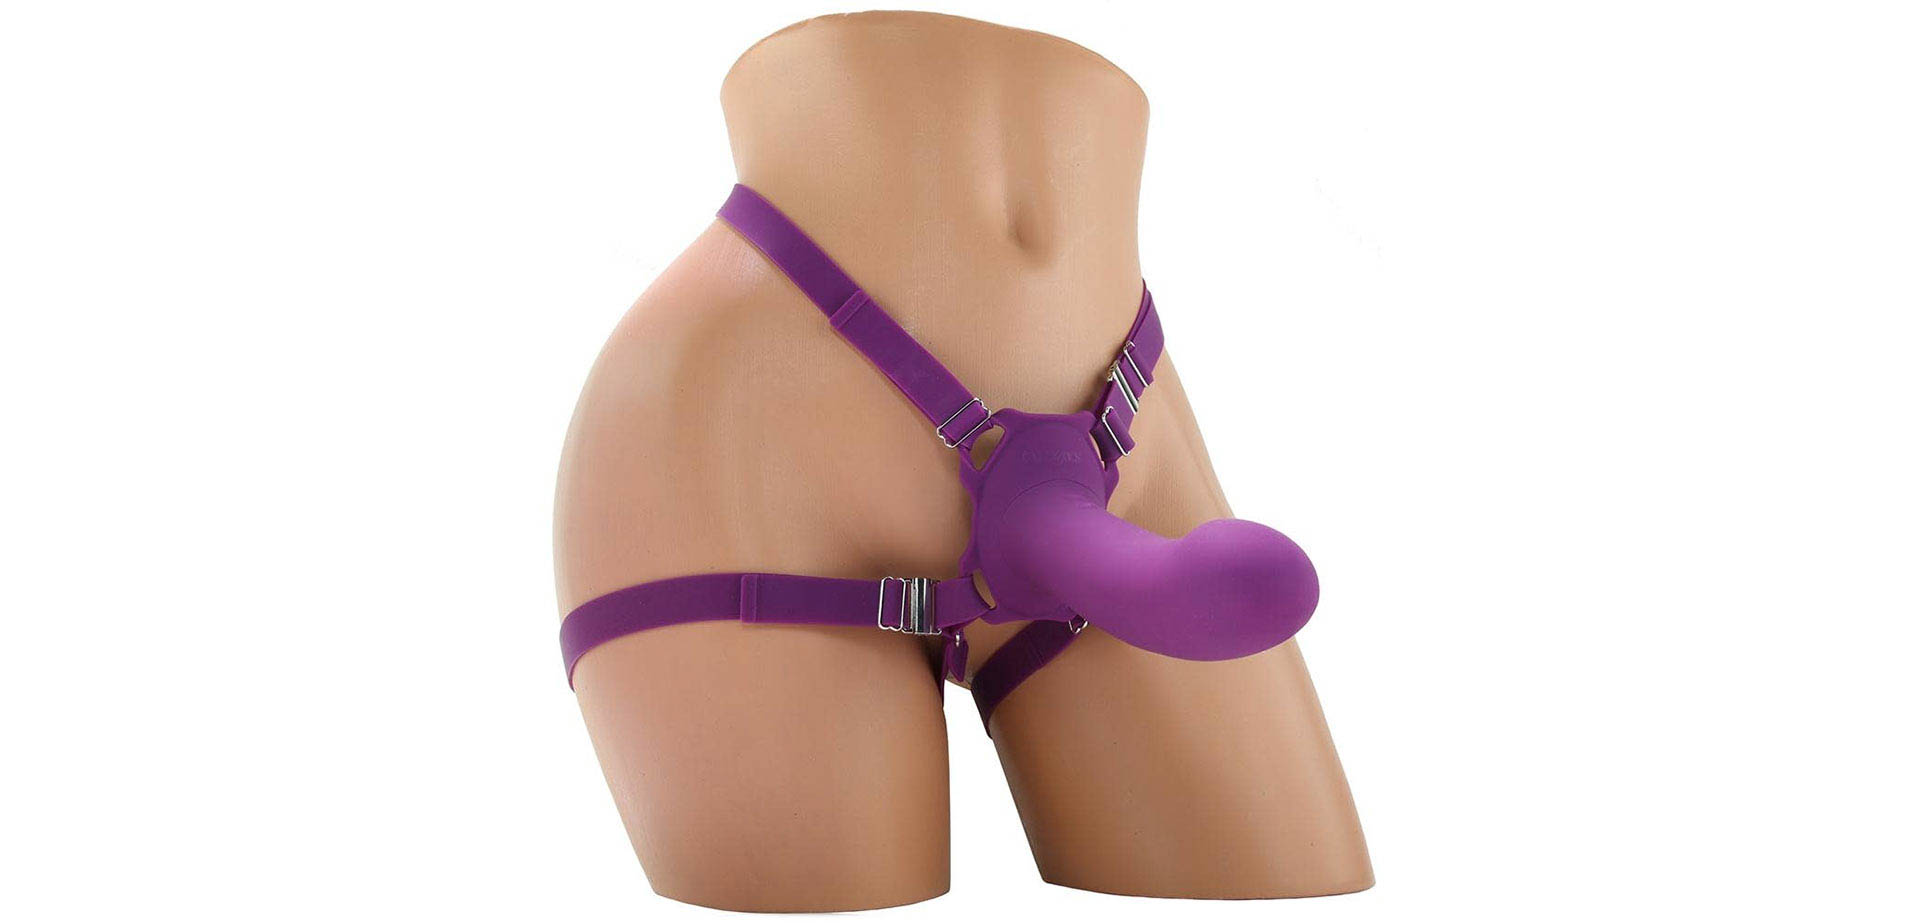 Me2 Rumbler Vibrating Strap-on by CalExotic.